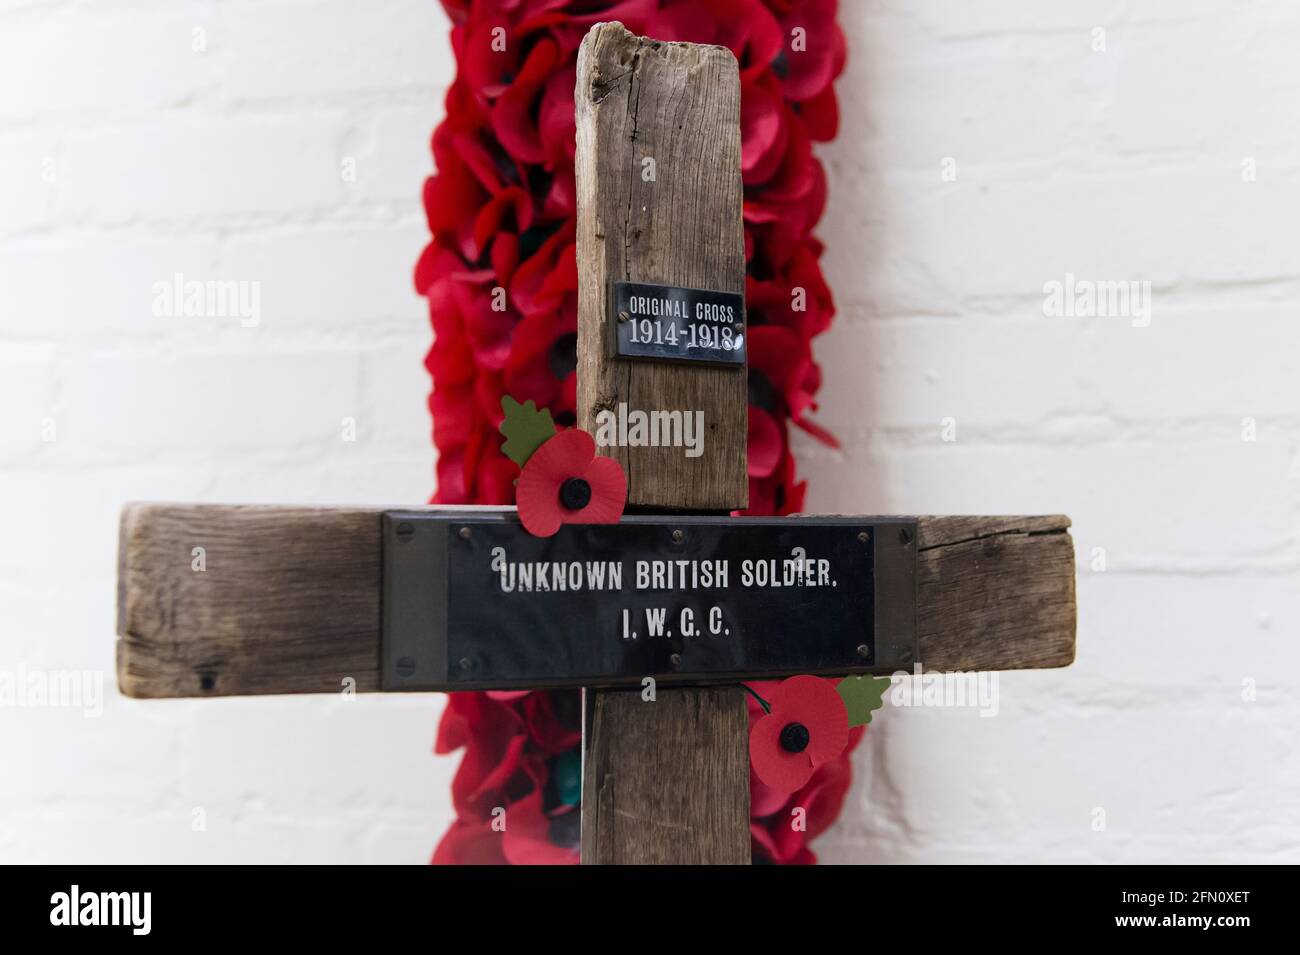 An original cross of an unknown soldier killed in the Fisrt World War at, The Royal British Legion's Poppy Factory, 20 Petersham Road, Richmond, London, UK. The Poppy Factory employs ex-service personnel to makes poppies, remembrance crosses, sprays and wreaths for The Royal British Legion’s annual Appeal and Remembrance Day. The Poppy Factory is also responsible for planting and hosting The Field of Remembrance at Westminster Abbey. The Royal British Legion's Poppy Factory, 20 Petersham Road, London, UK.  16 Oct 2013 Stock Photo